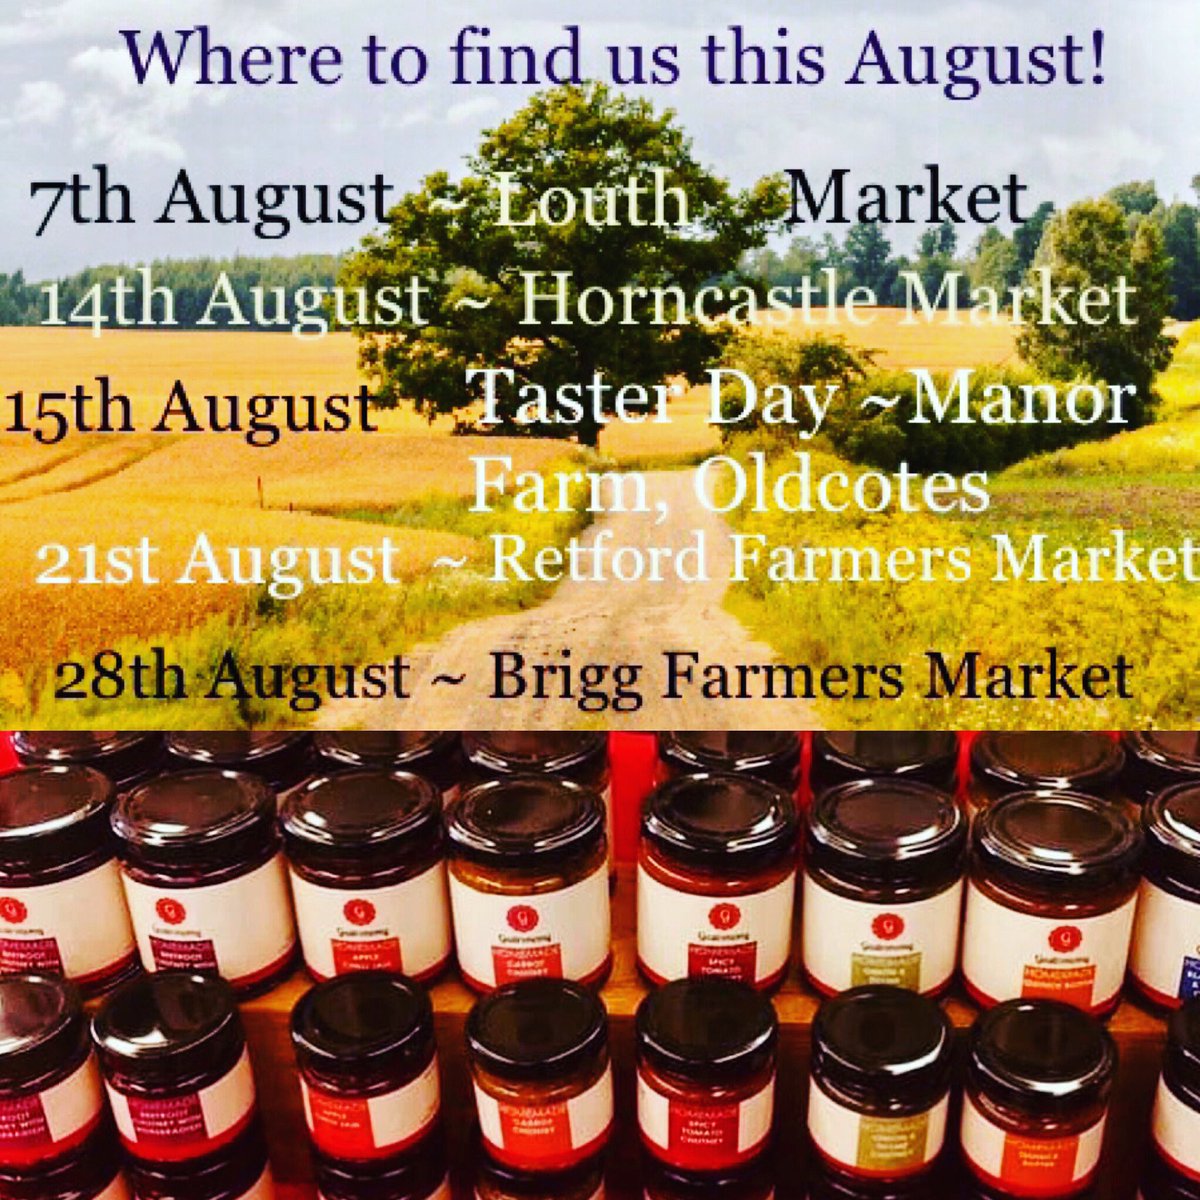 July flew by! Looking forward to a busy August pop down to the market , into a stockist #parkinsbutchers #crowle #beckingham #greencottageLouth #manorcraftsandgifts or find us online. #madeinlincolnshire #lincsconnect #louth #horncastle #oldcotes #retford #brigg